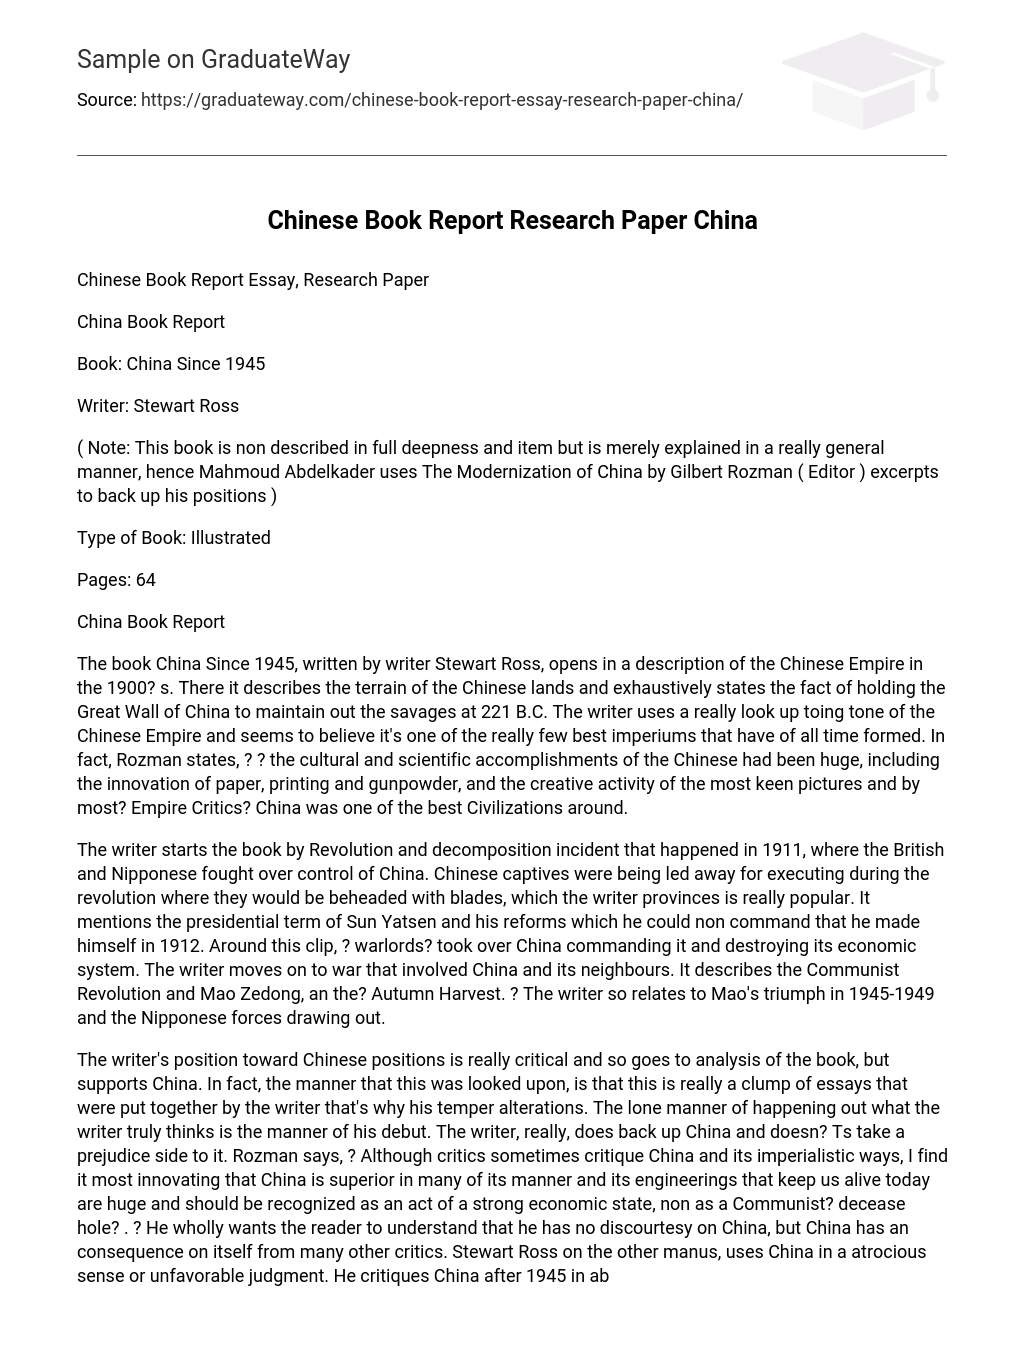 Chinese Book Report Research Paper China